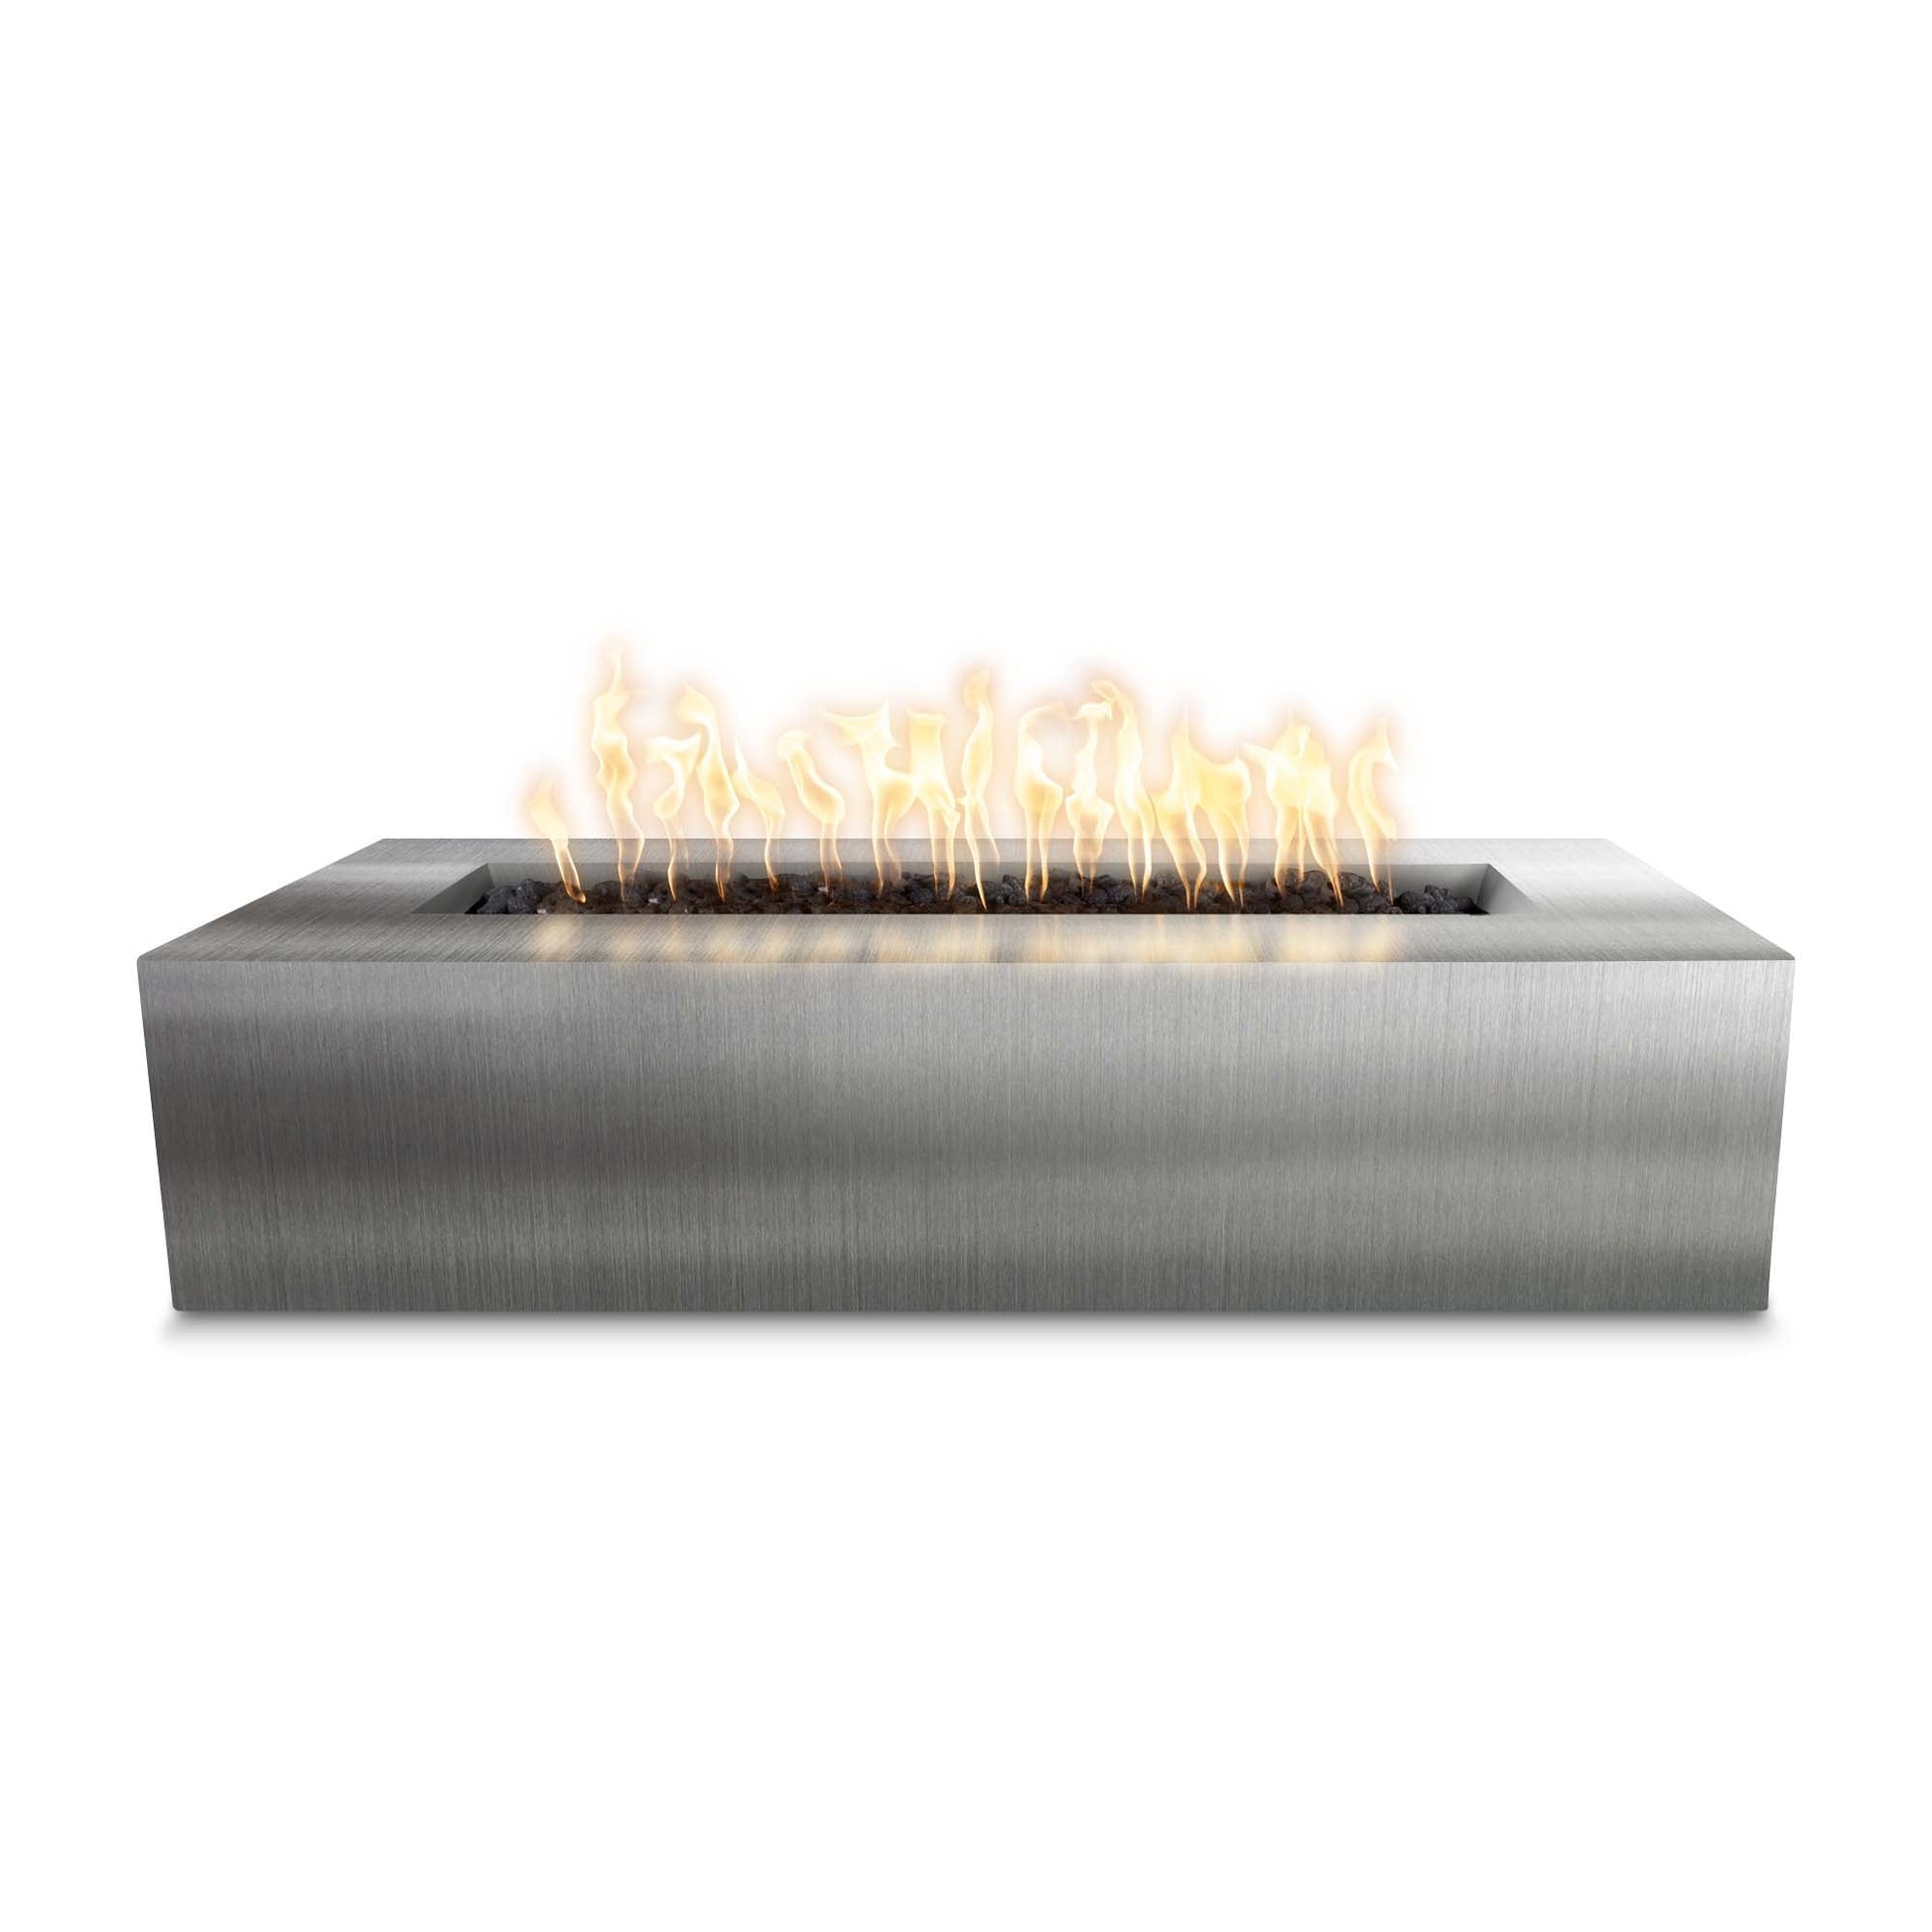 The Outdoor Plus Rectangular Regal 48" Corten Steel Natural Gas Fire Pit with 110V Electronic Ignition